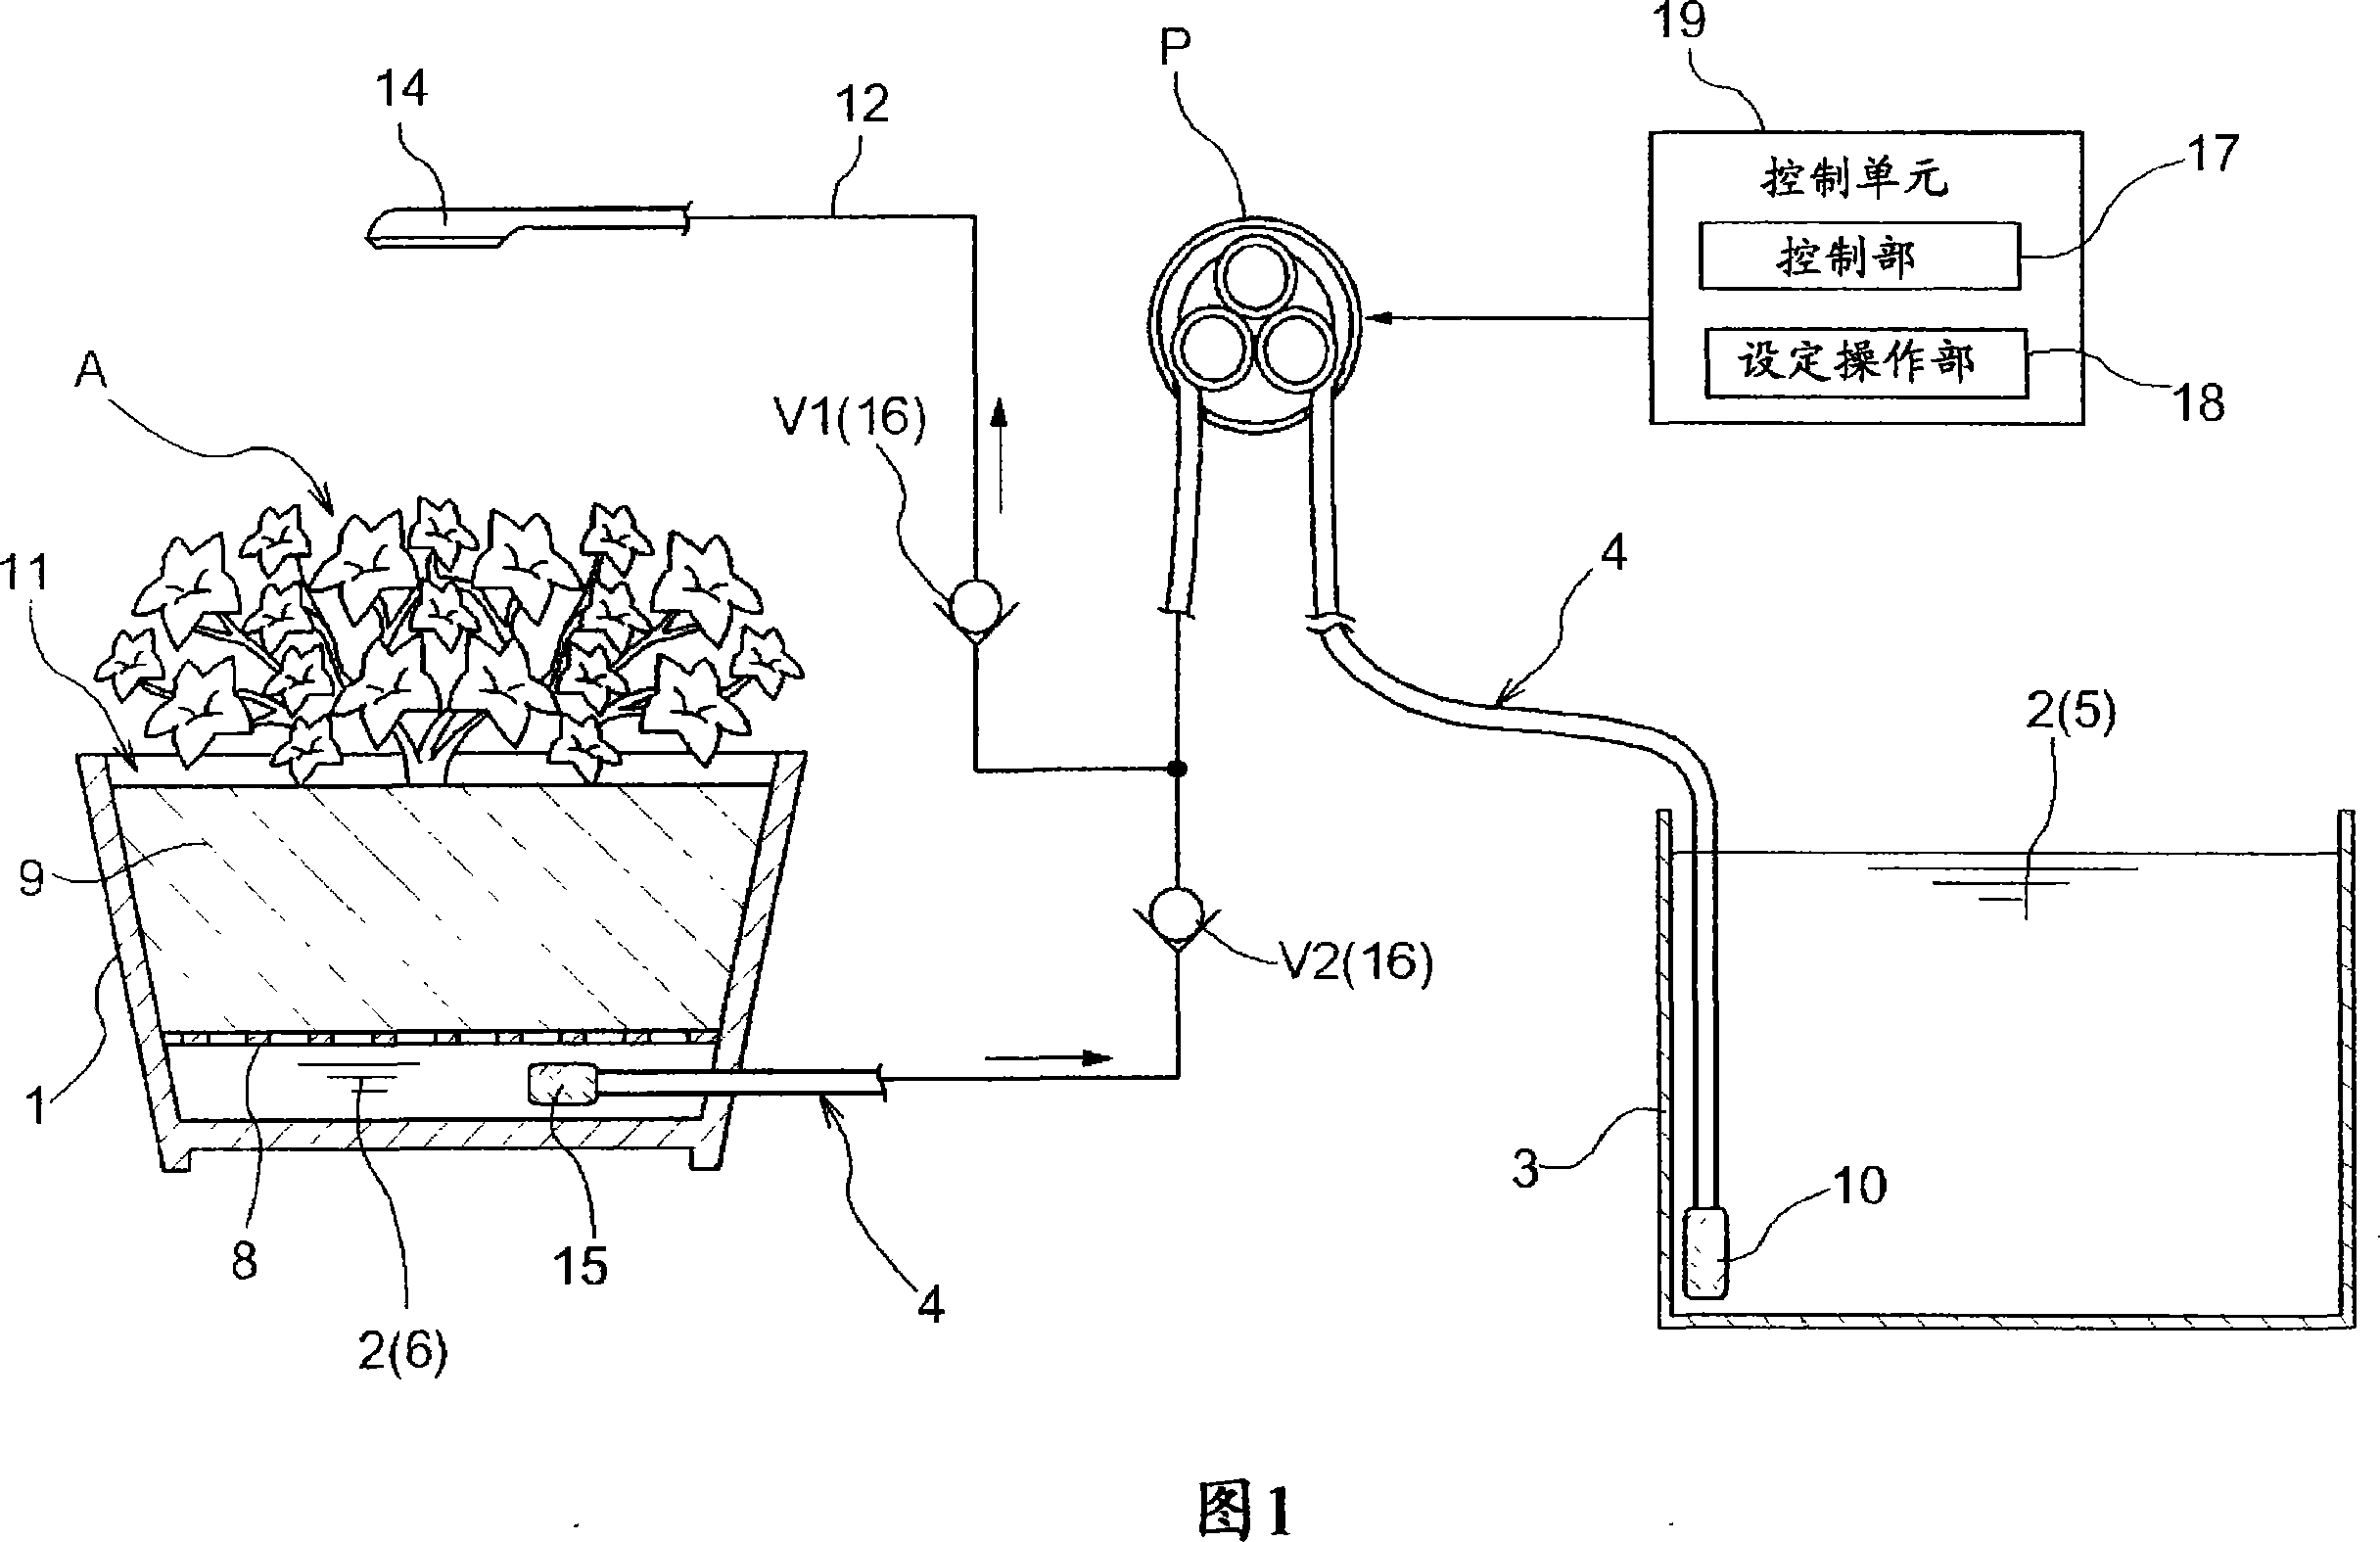 Plant culturing device